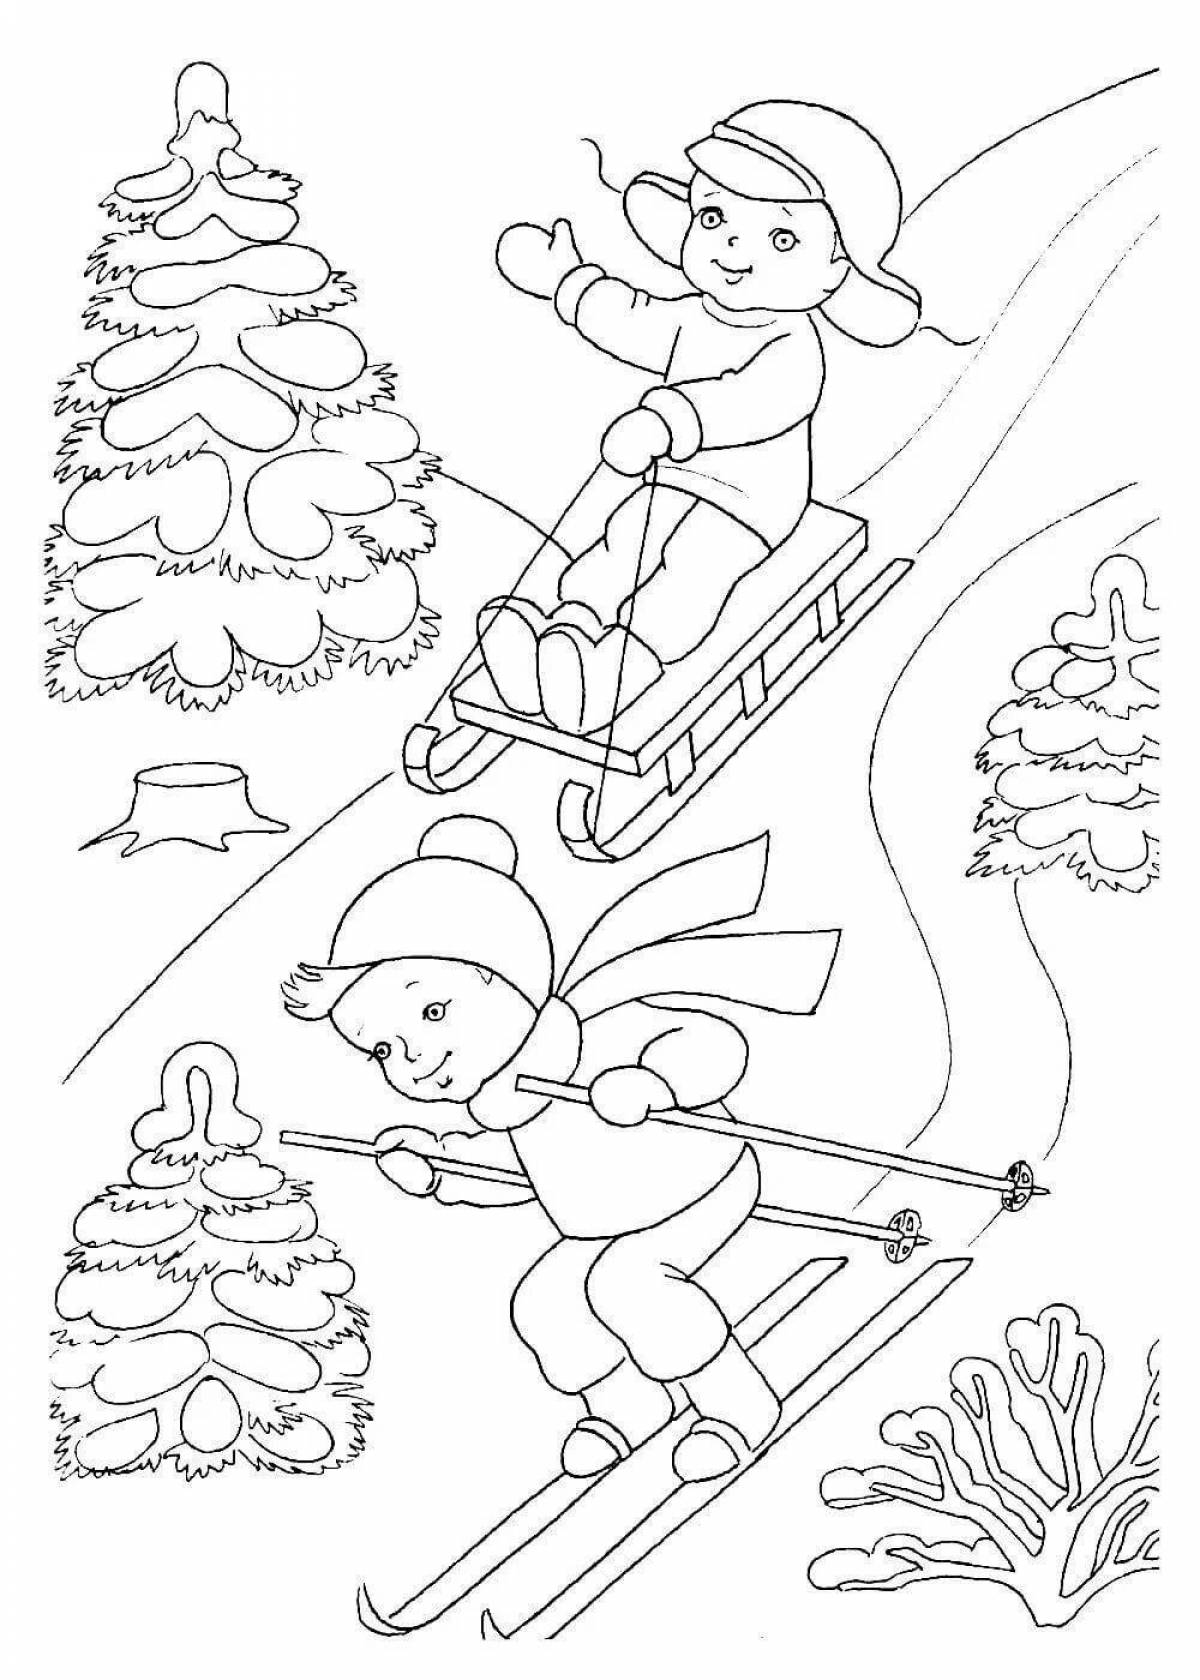 Shiny winter funny coloring book